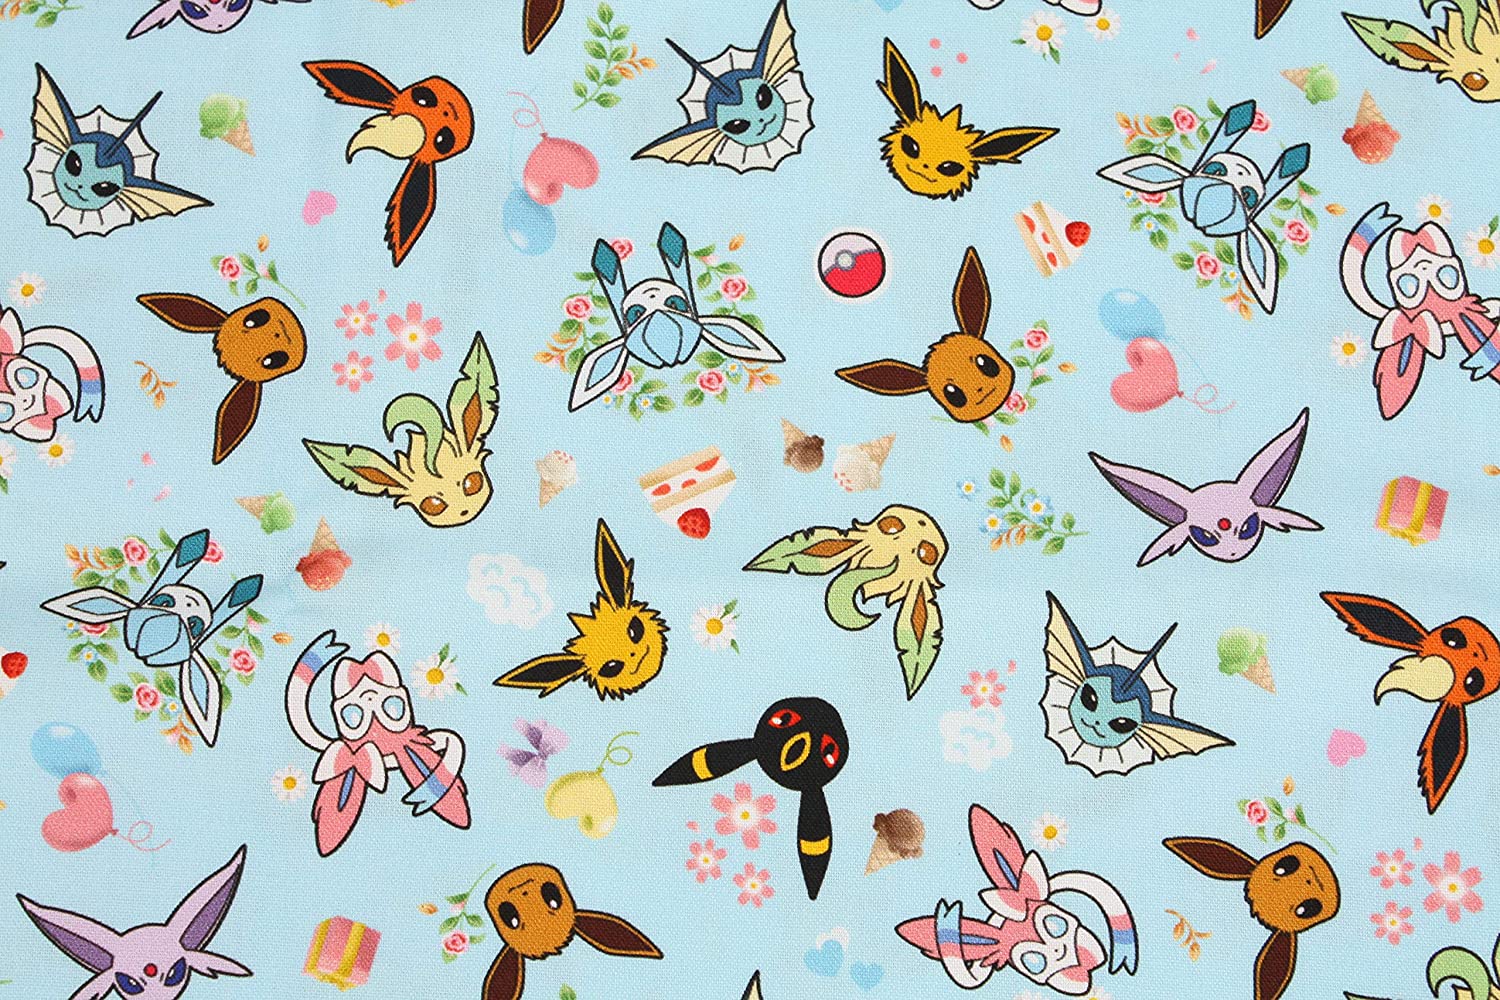 Character Fabric Pok-mon Ice Cream Cloth 100% Cotton Sheeting Pocket Monster Pokemon 17.7 x 43.3 inches (45 x 110 cm)